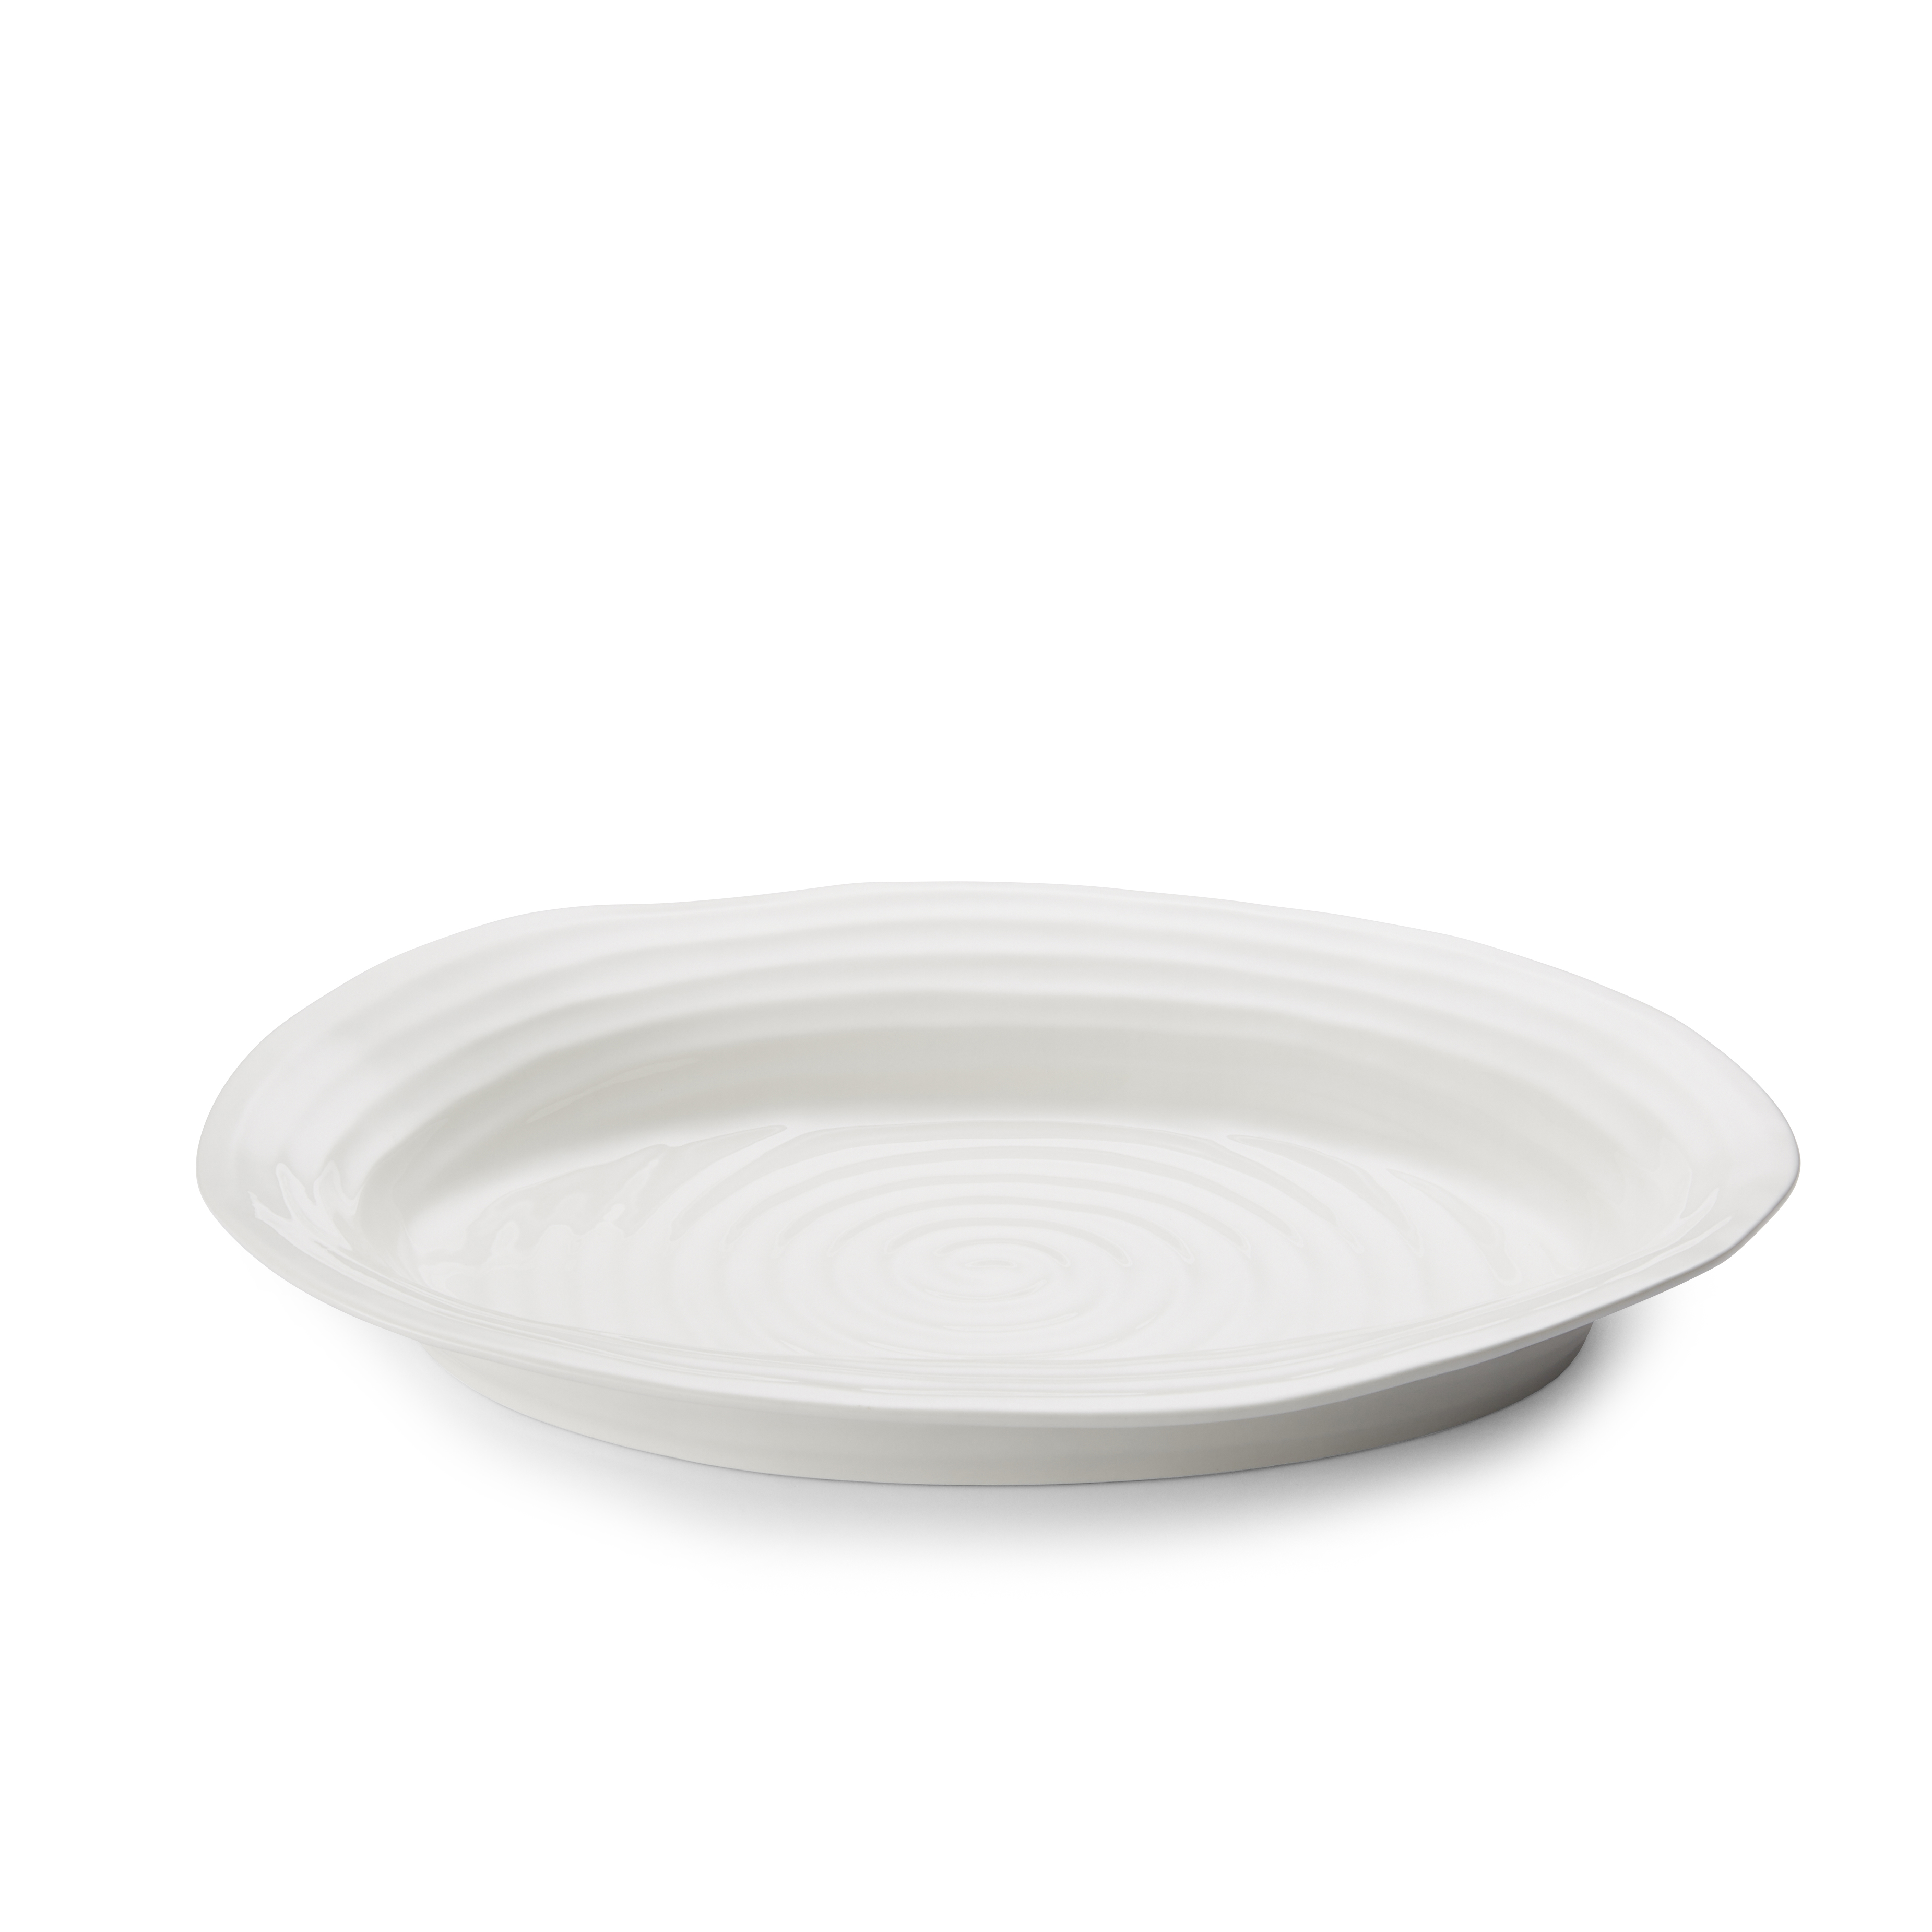 Sophie Conran Medium Oval Plate, White image number null